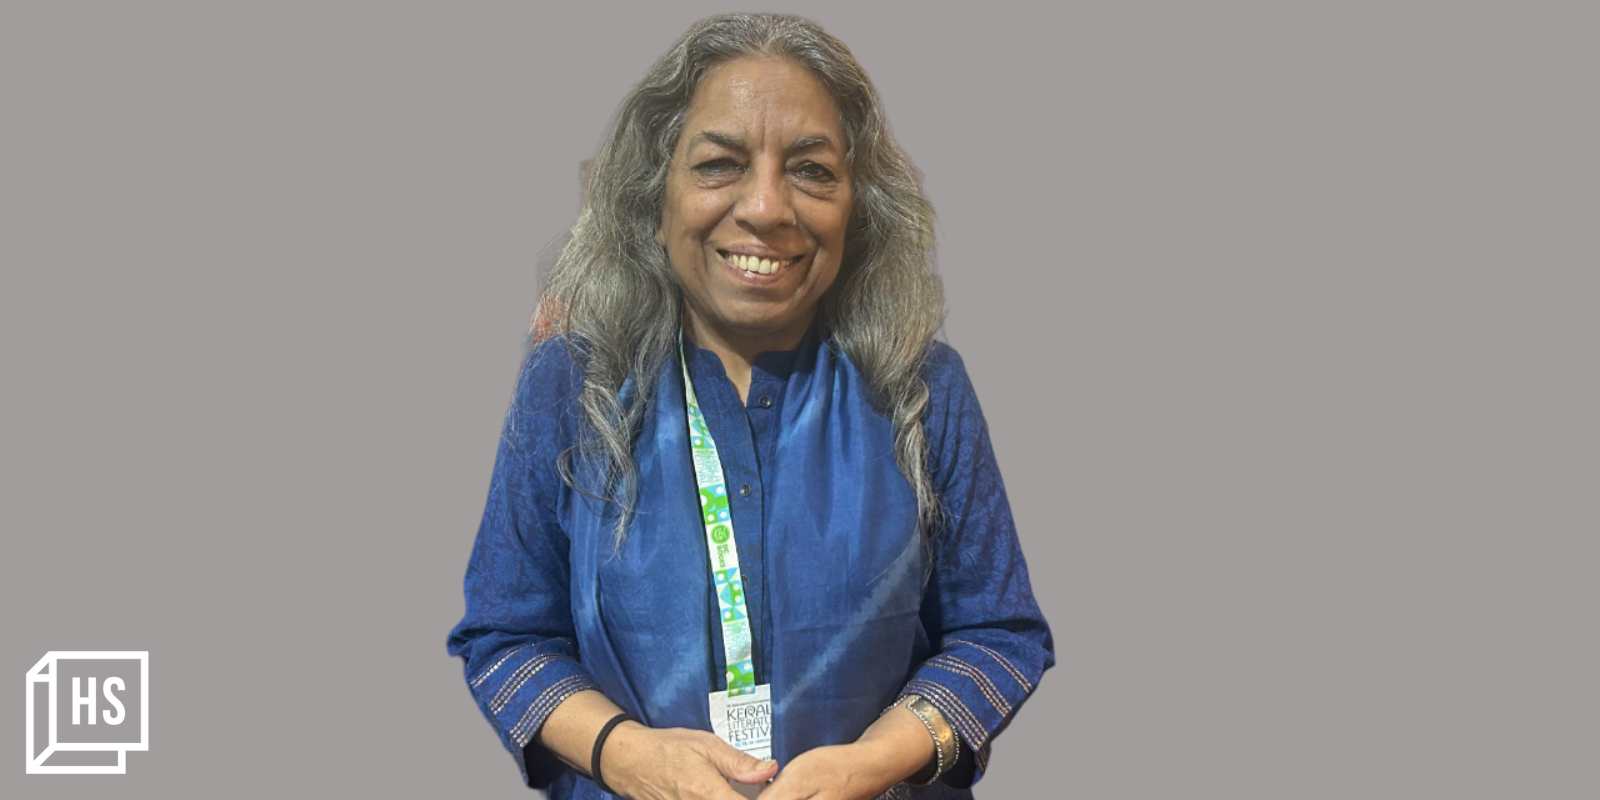 Urvashi Butalia on feminist writing, the #MeToo movement and documenting women’s voices

